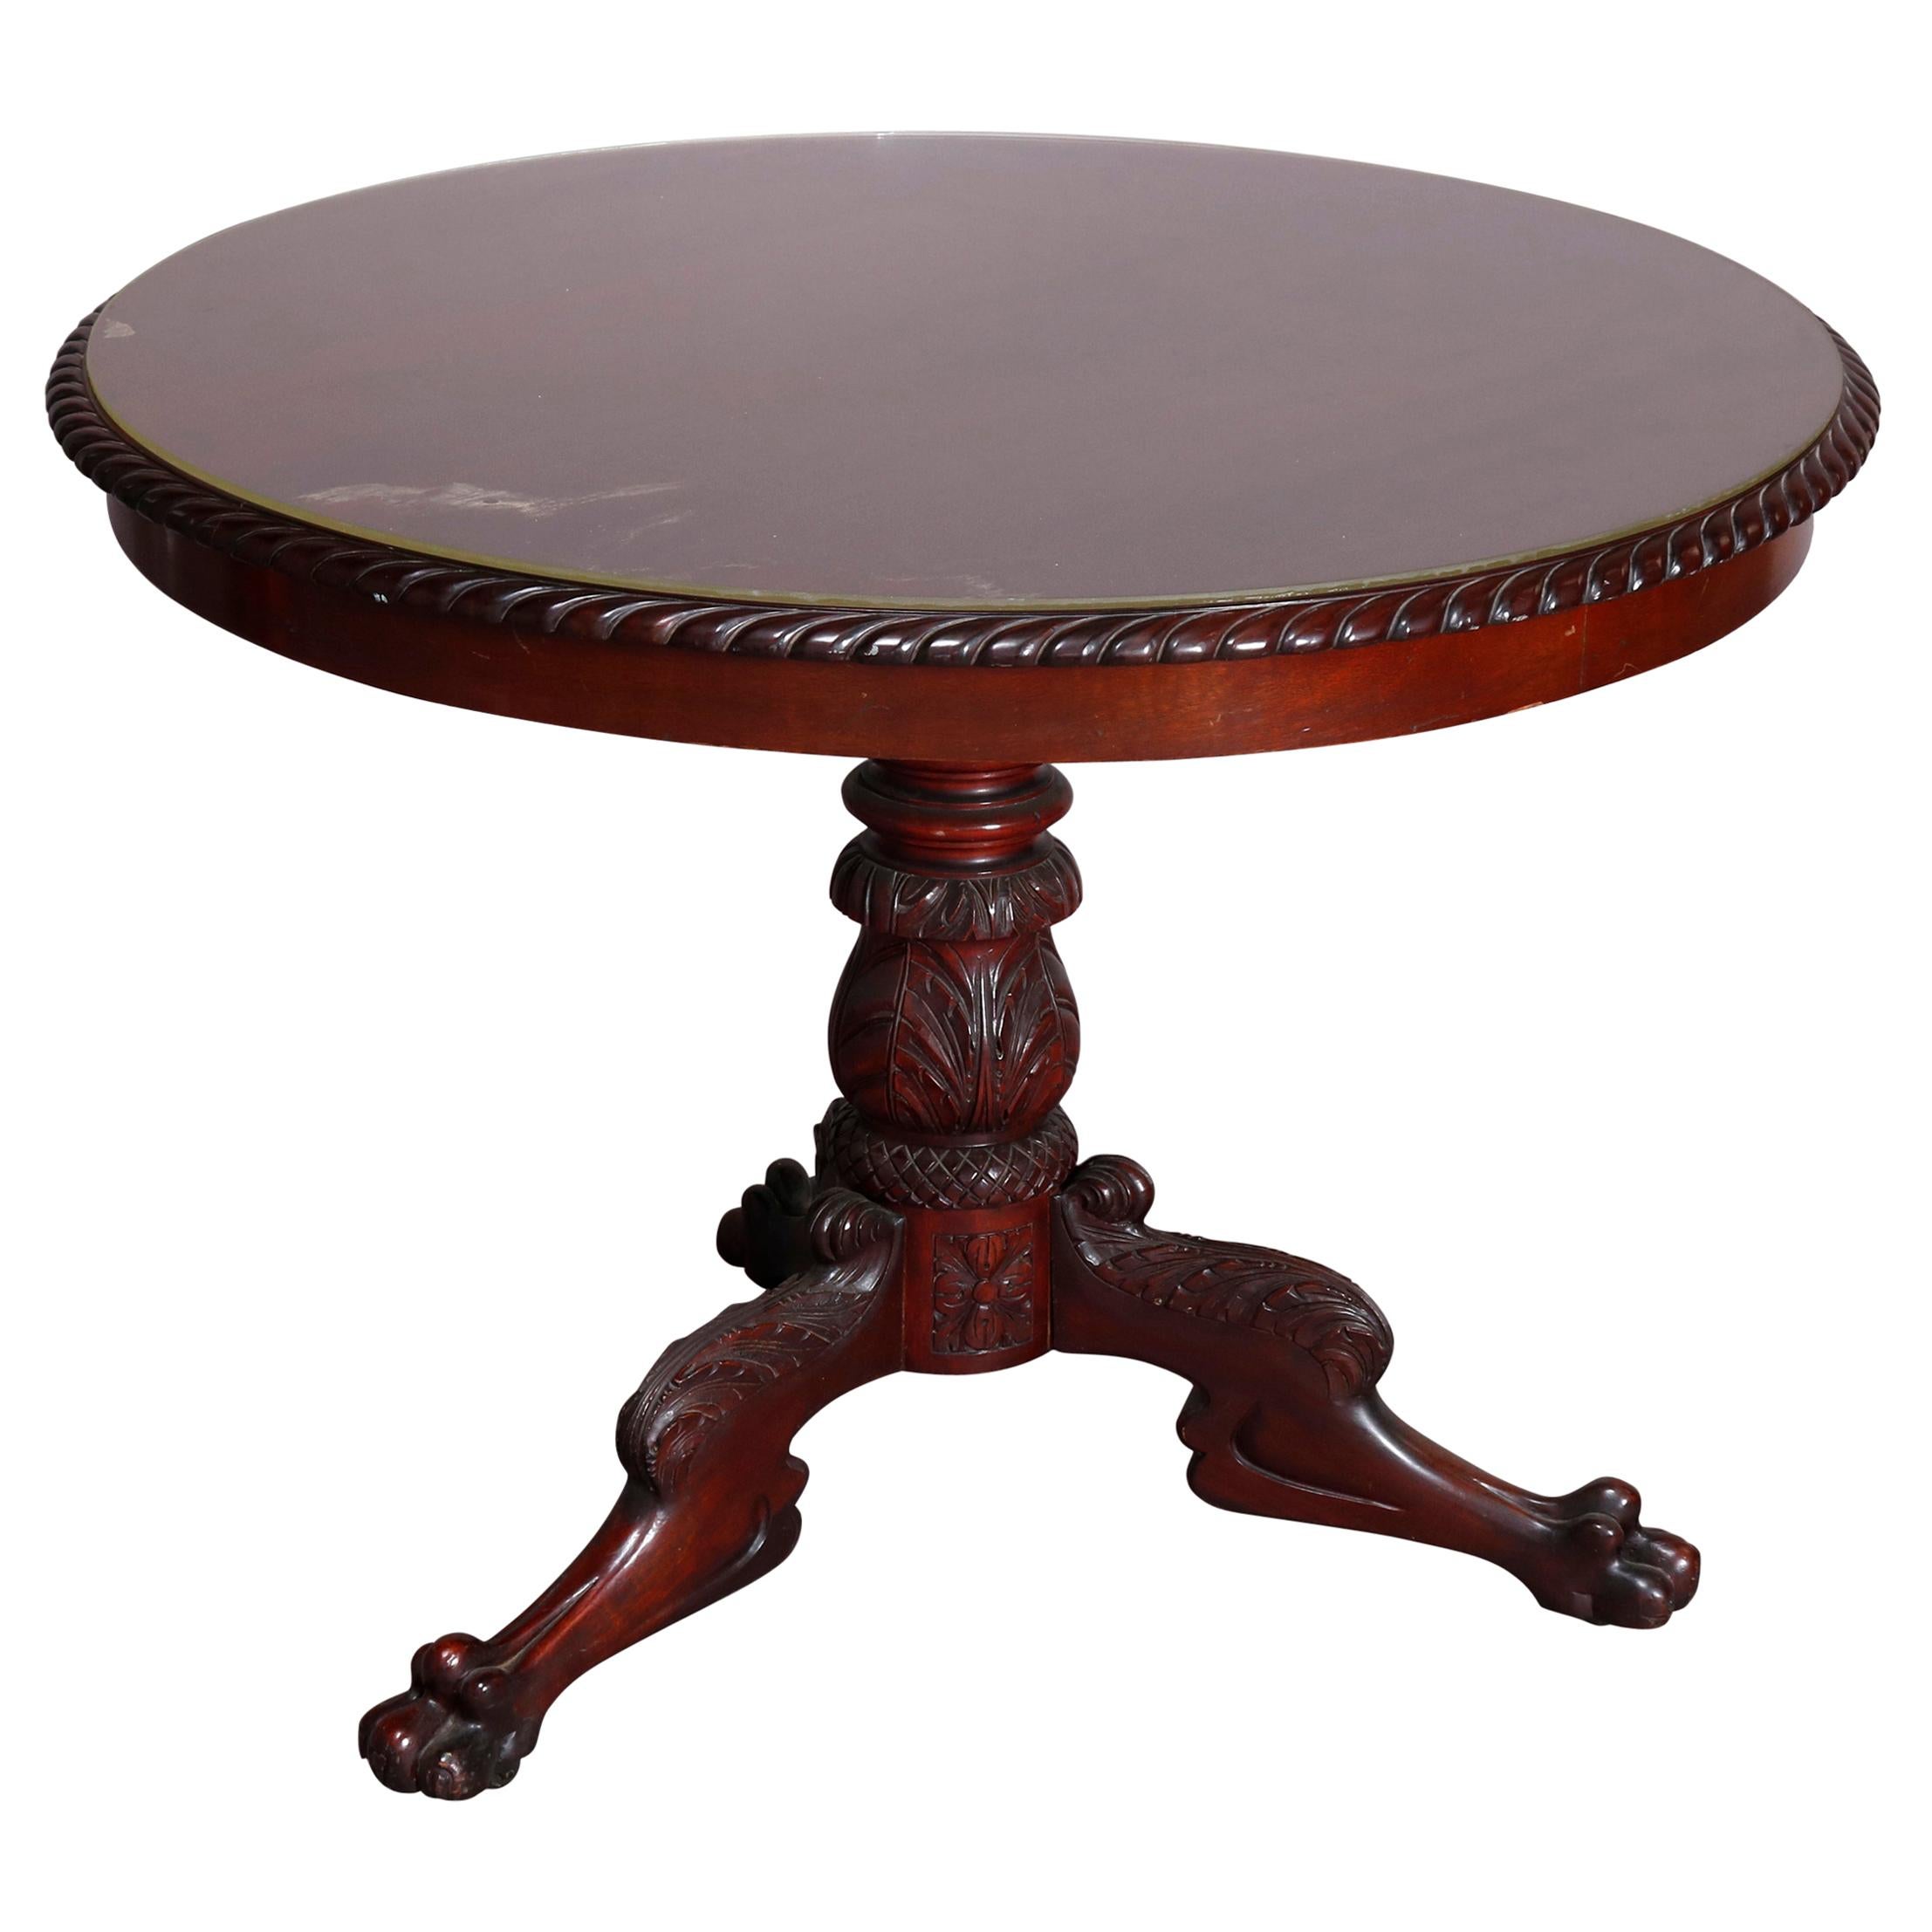 Antique Neoclassical Style Carved Mahogany Center Table, circa 1900